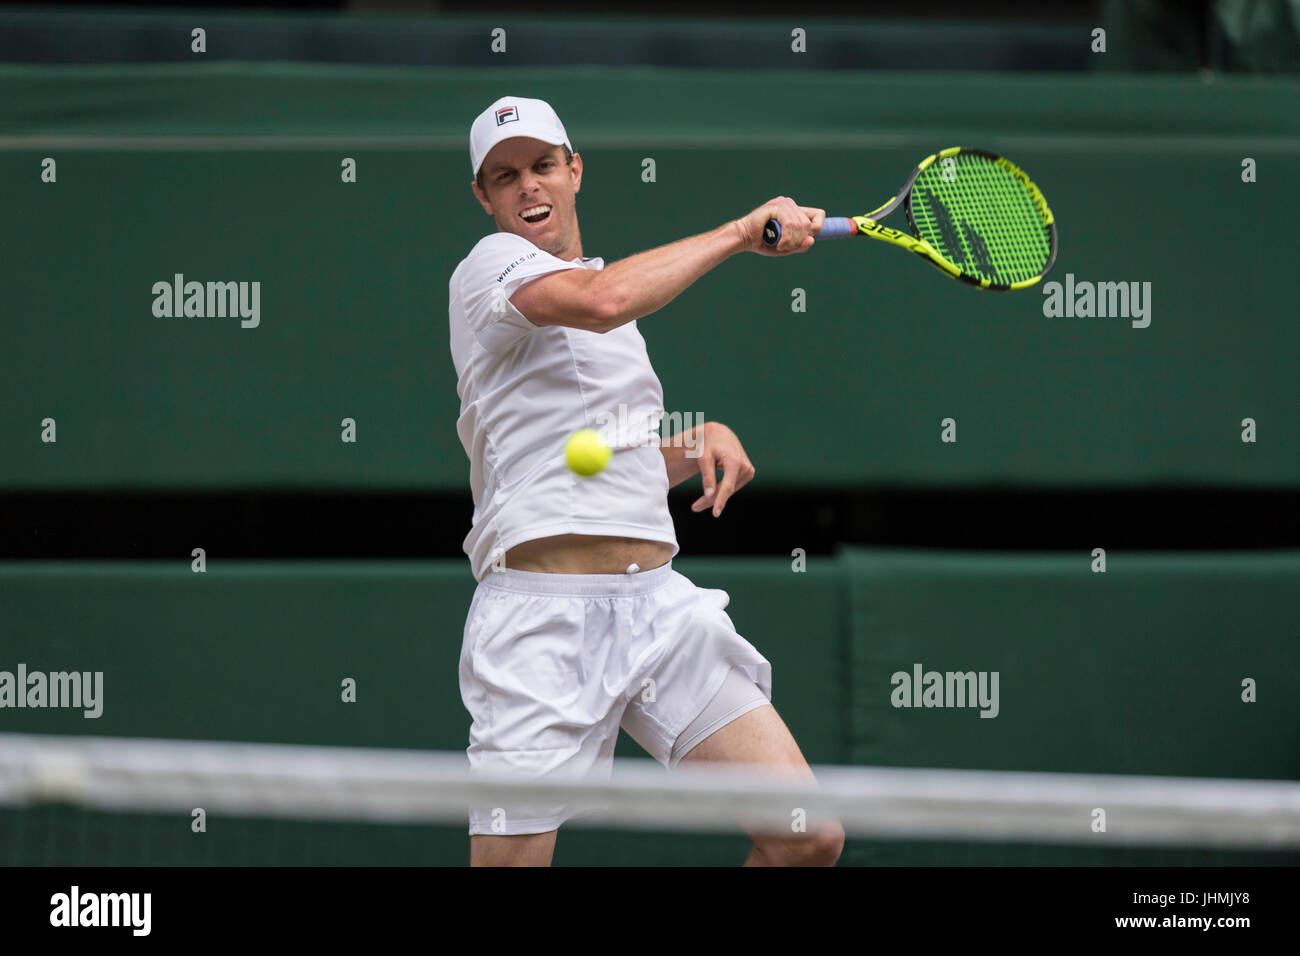 Wimbledon, London, UK. 14th July, 2017. The Wimbledon Tennis Championships 2017 held at The All England Lawn Tennis and Croquet Club, London, England, UK.    GENTLEMEN'S SINGLES - SEMI-FINALS Sam Querrey (USA) [24] v Marin Cilic (CRO) [7] on Centre Court.  Pictured:- Sam Querrey, Stock Photo